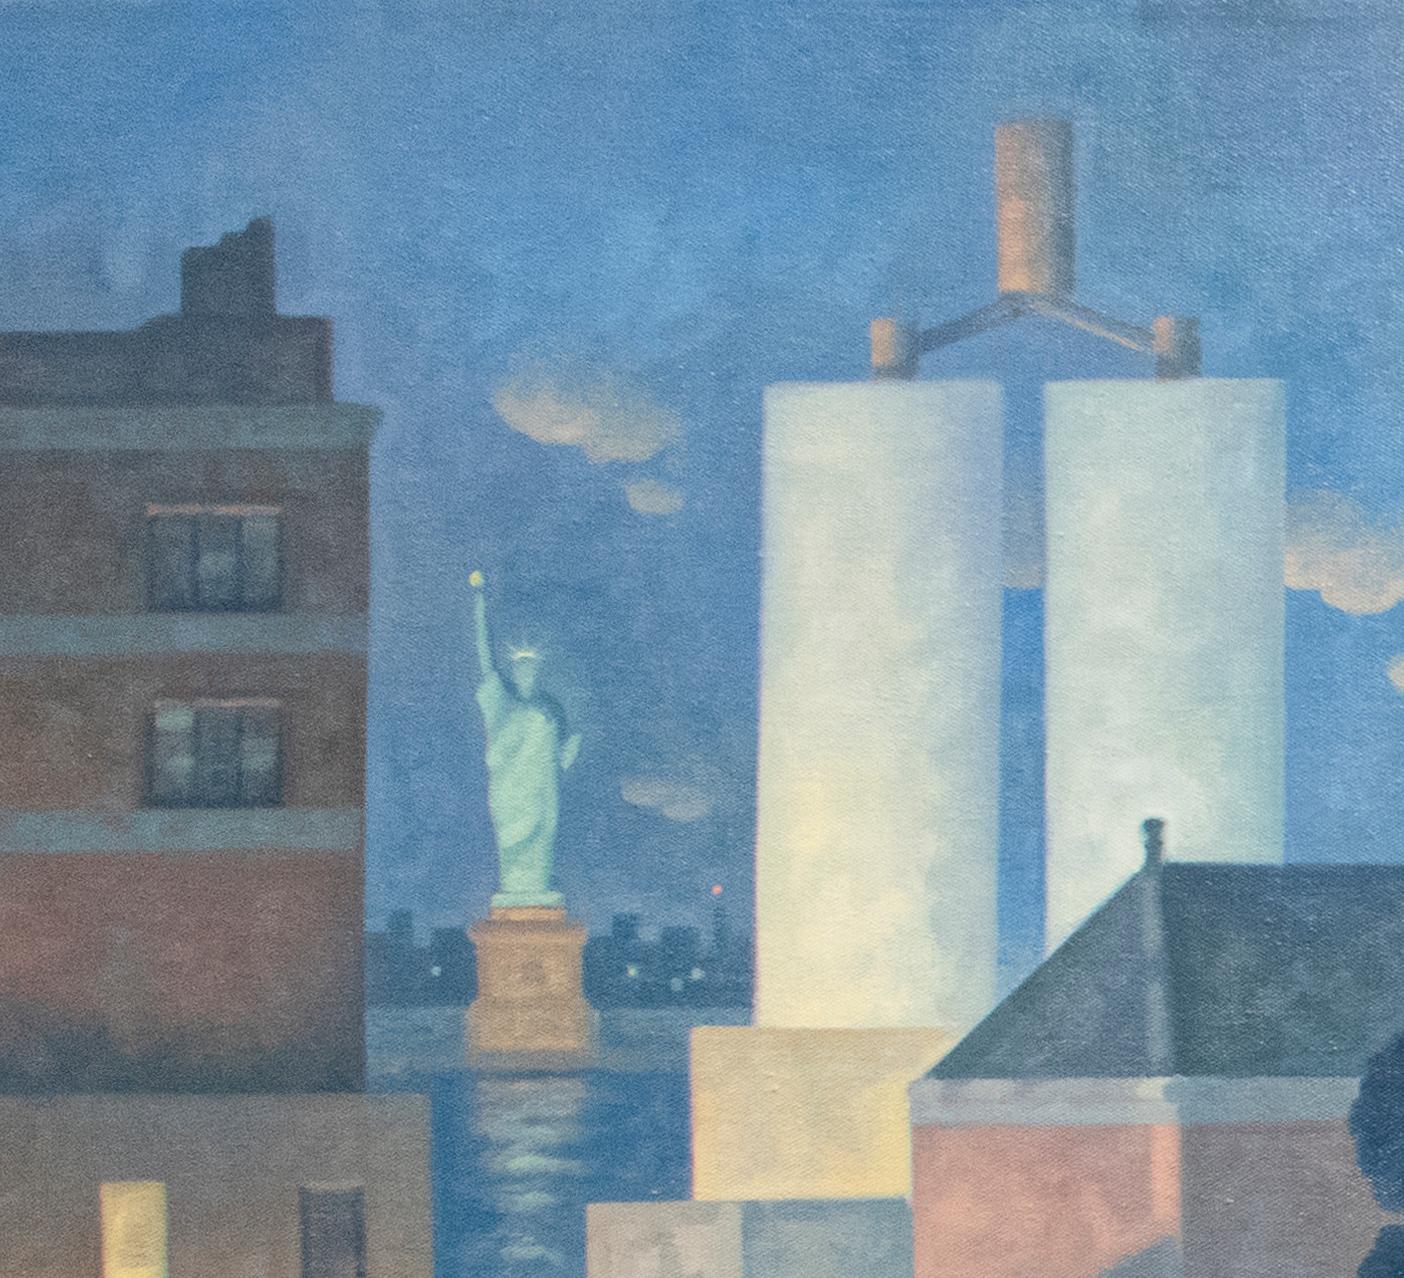 Iconic cityscape oil painting on canvas of Brooklyn's Green Wood Cemetery and Manhattan Skyline and Statue of Liberty painted on the horizon
Painted by Robert Goldstrom in 2019
36 x 72 inches, Oil on linen
38 x 74 x 2 inches framed (black wood